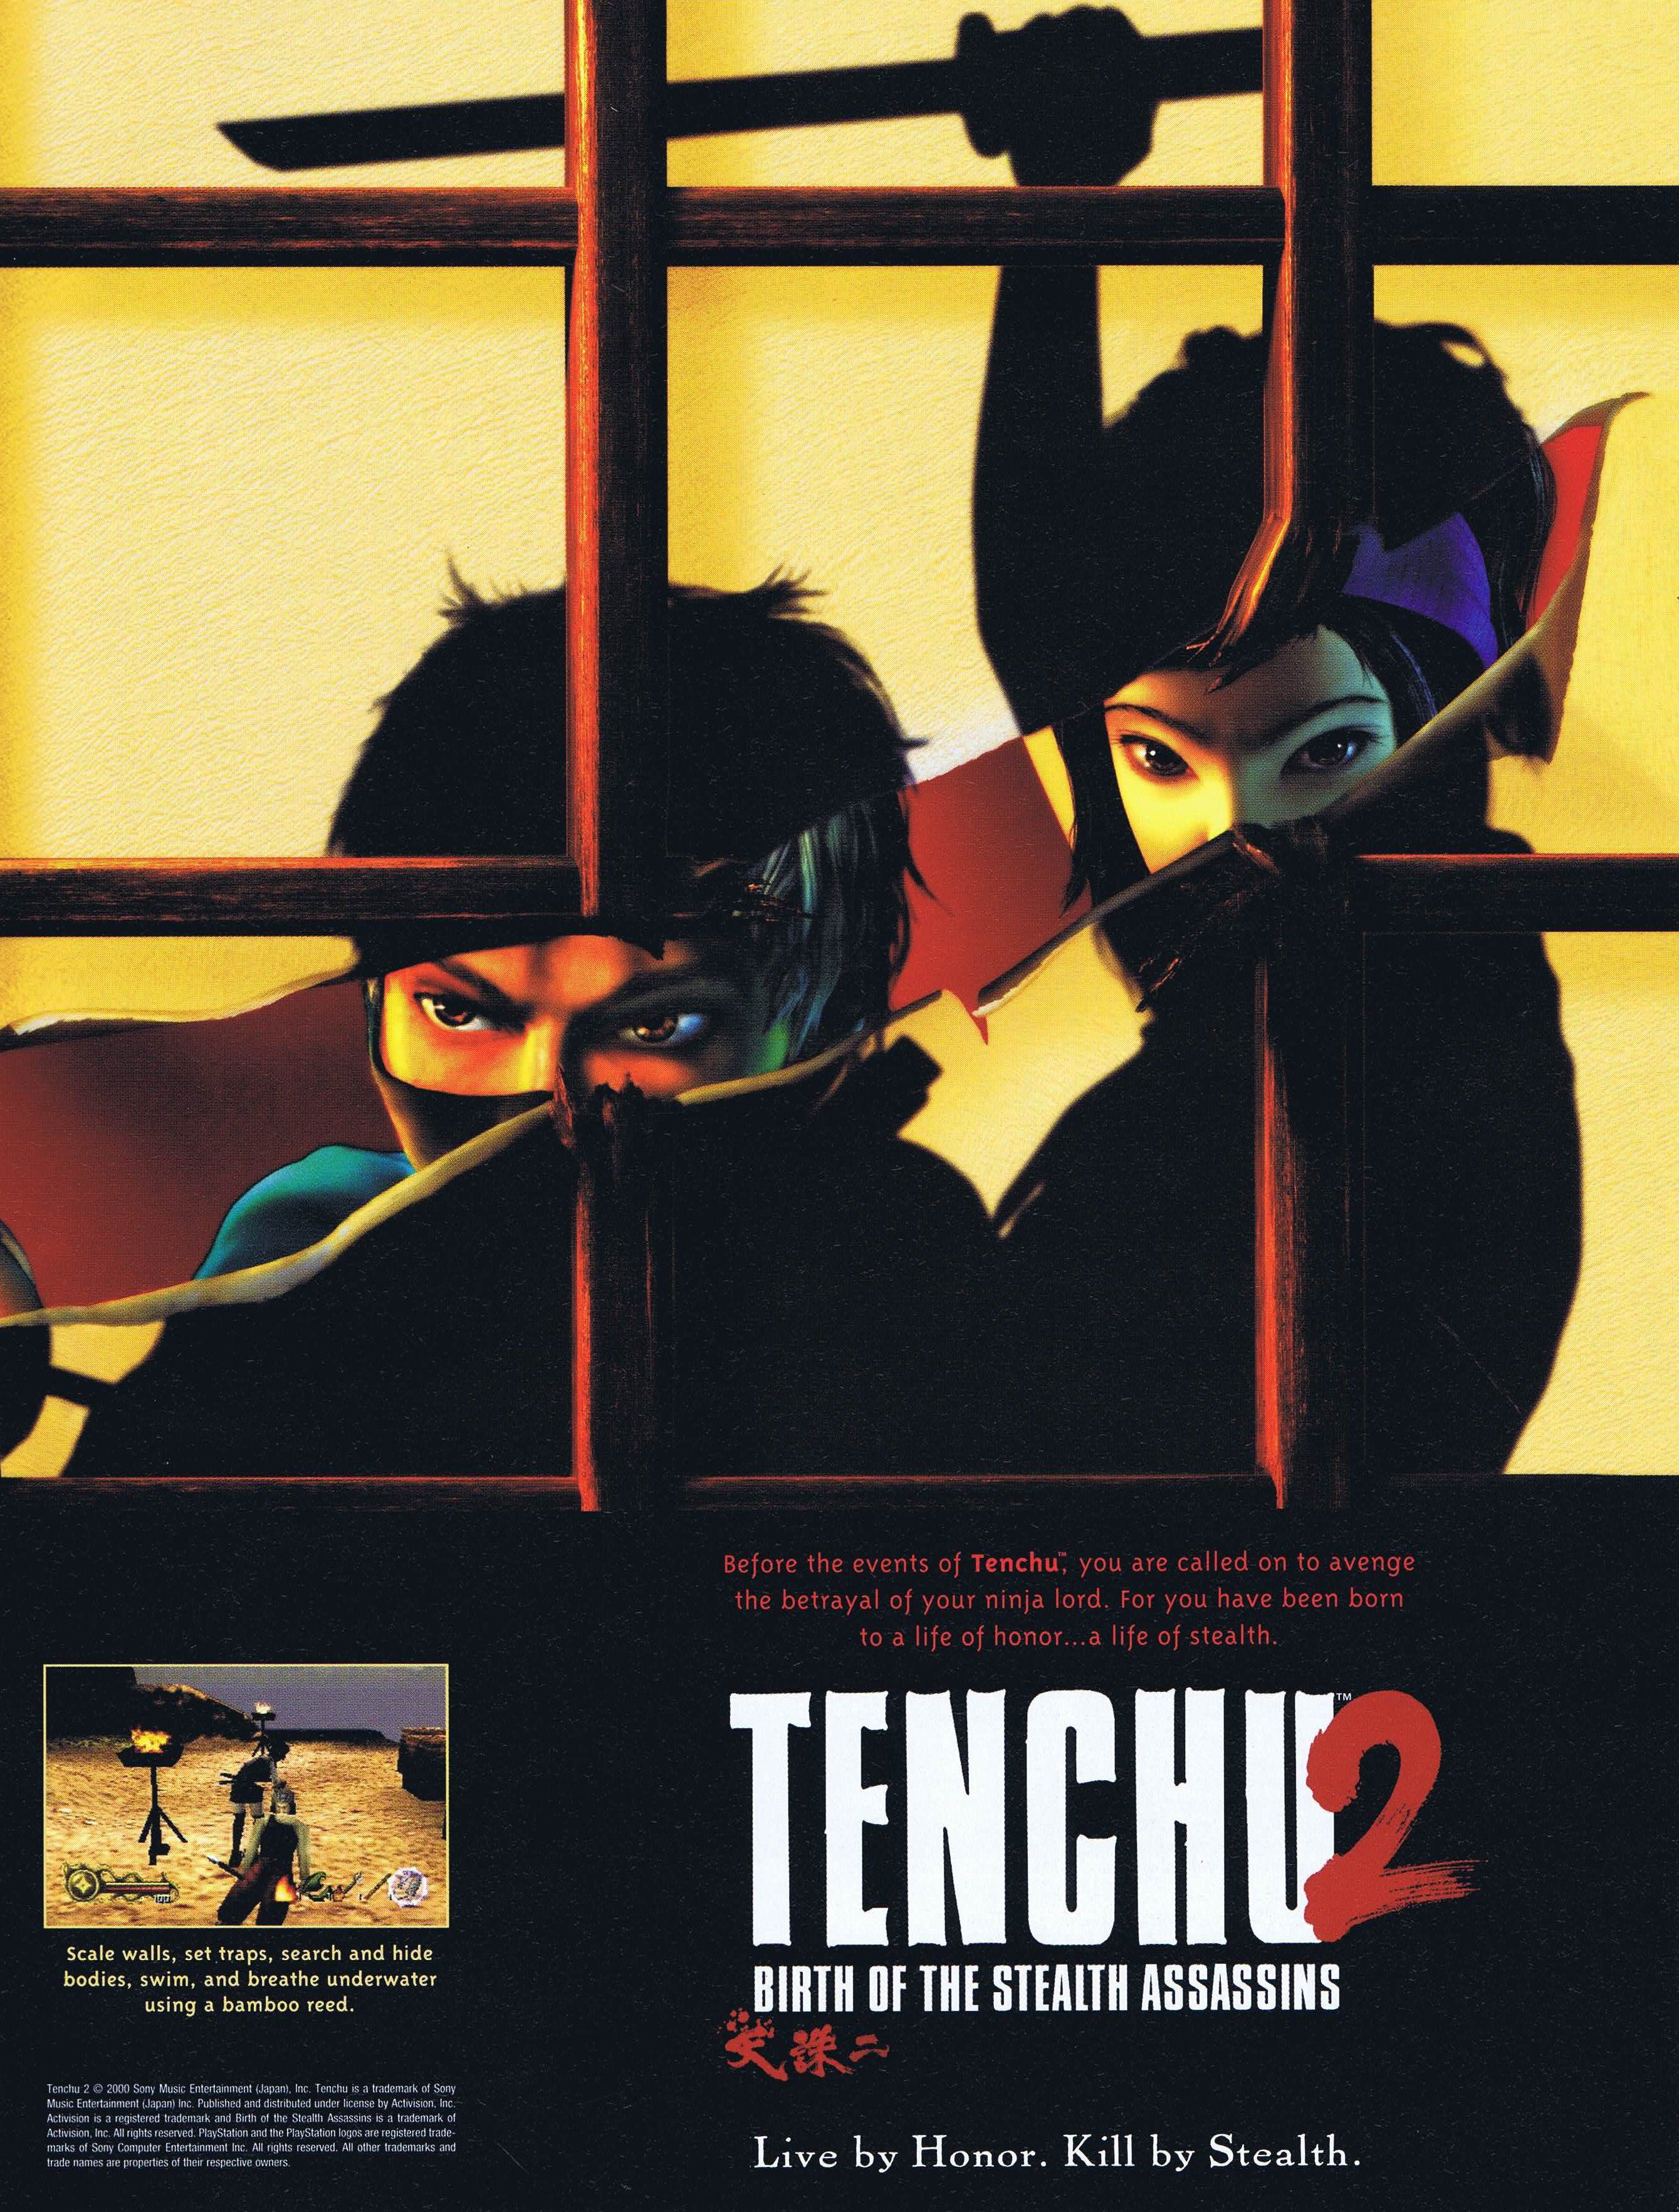 Tenchu 2 - Birth of the Stealth Assassins PSX cover